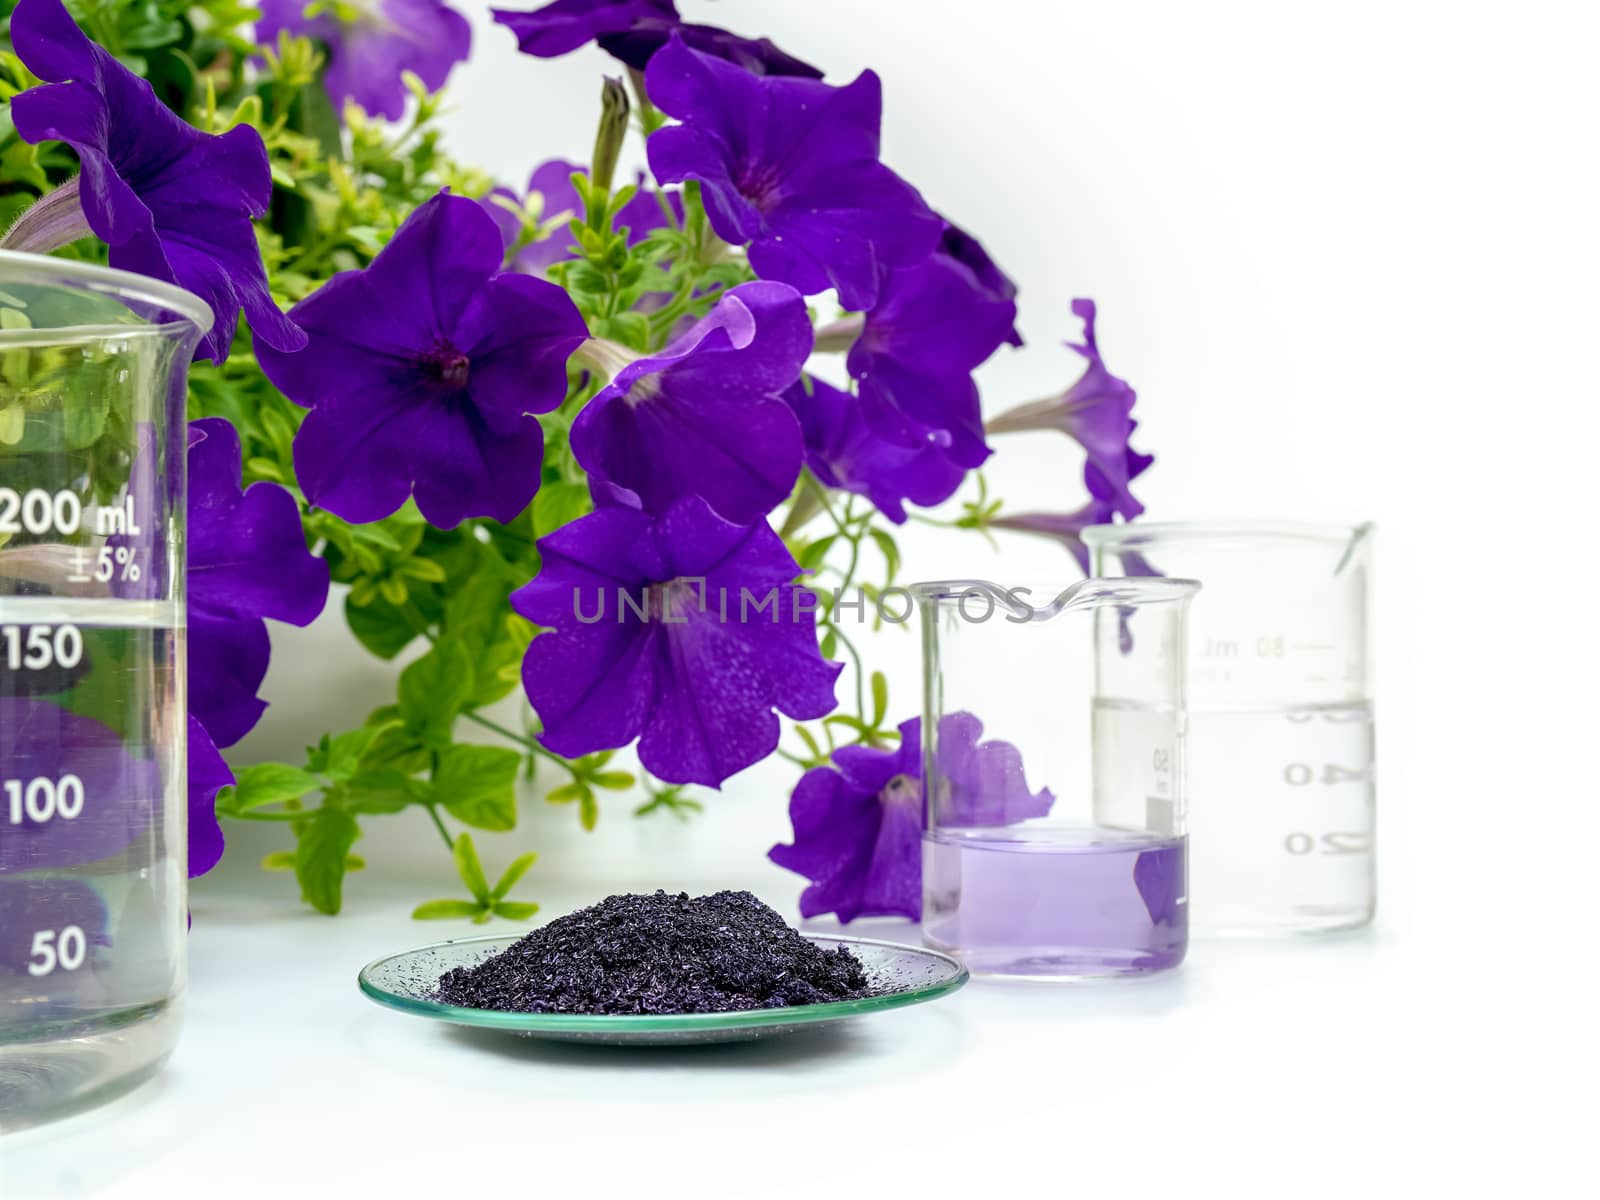 Cosmetic chemicals ingredient on white laboratory table. Potassium permanganate (KMnO4), Nickle Chloride, Alcohol 